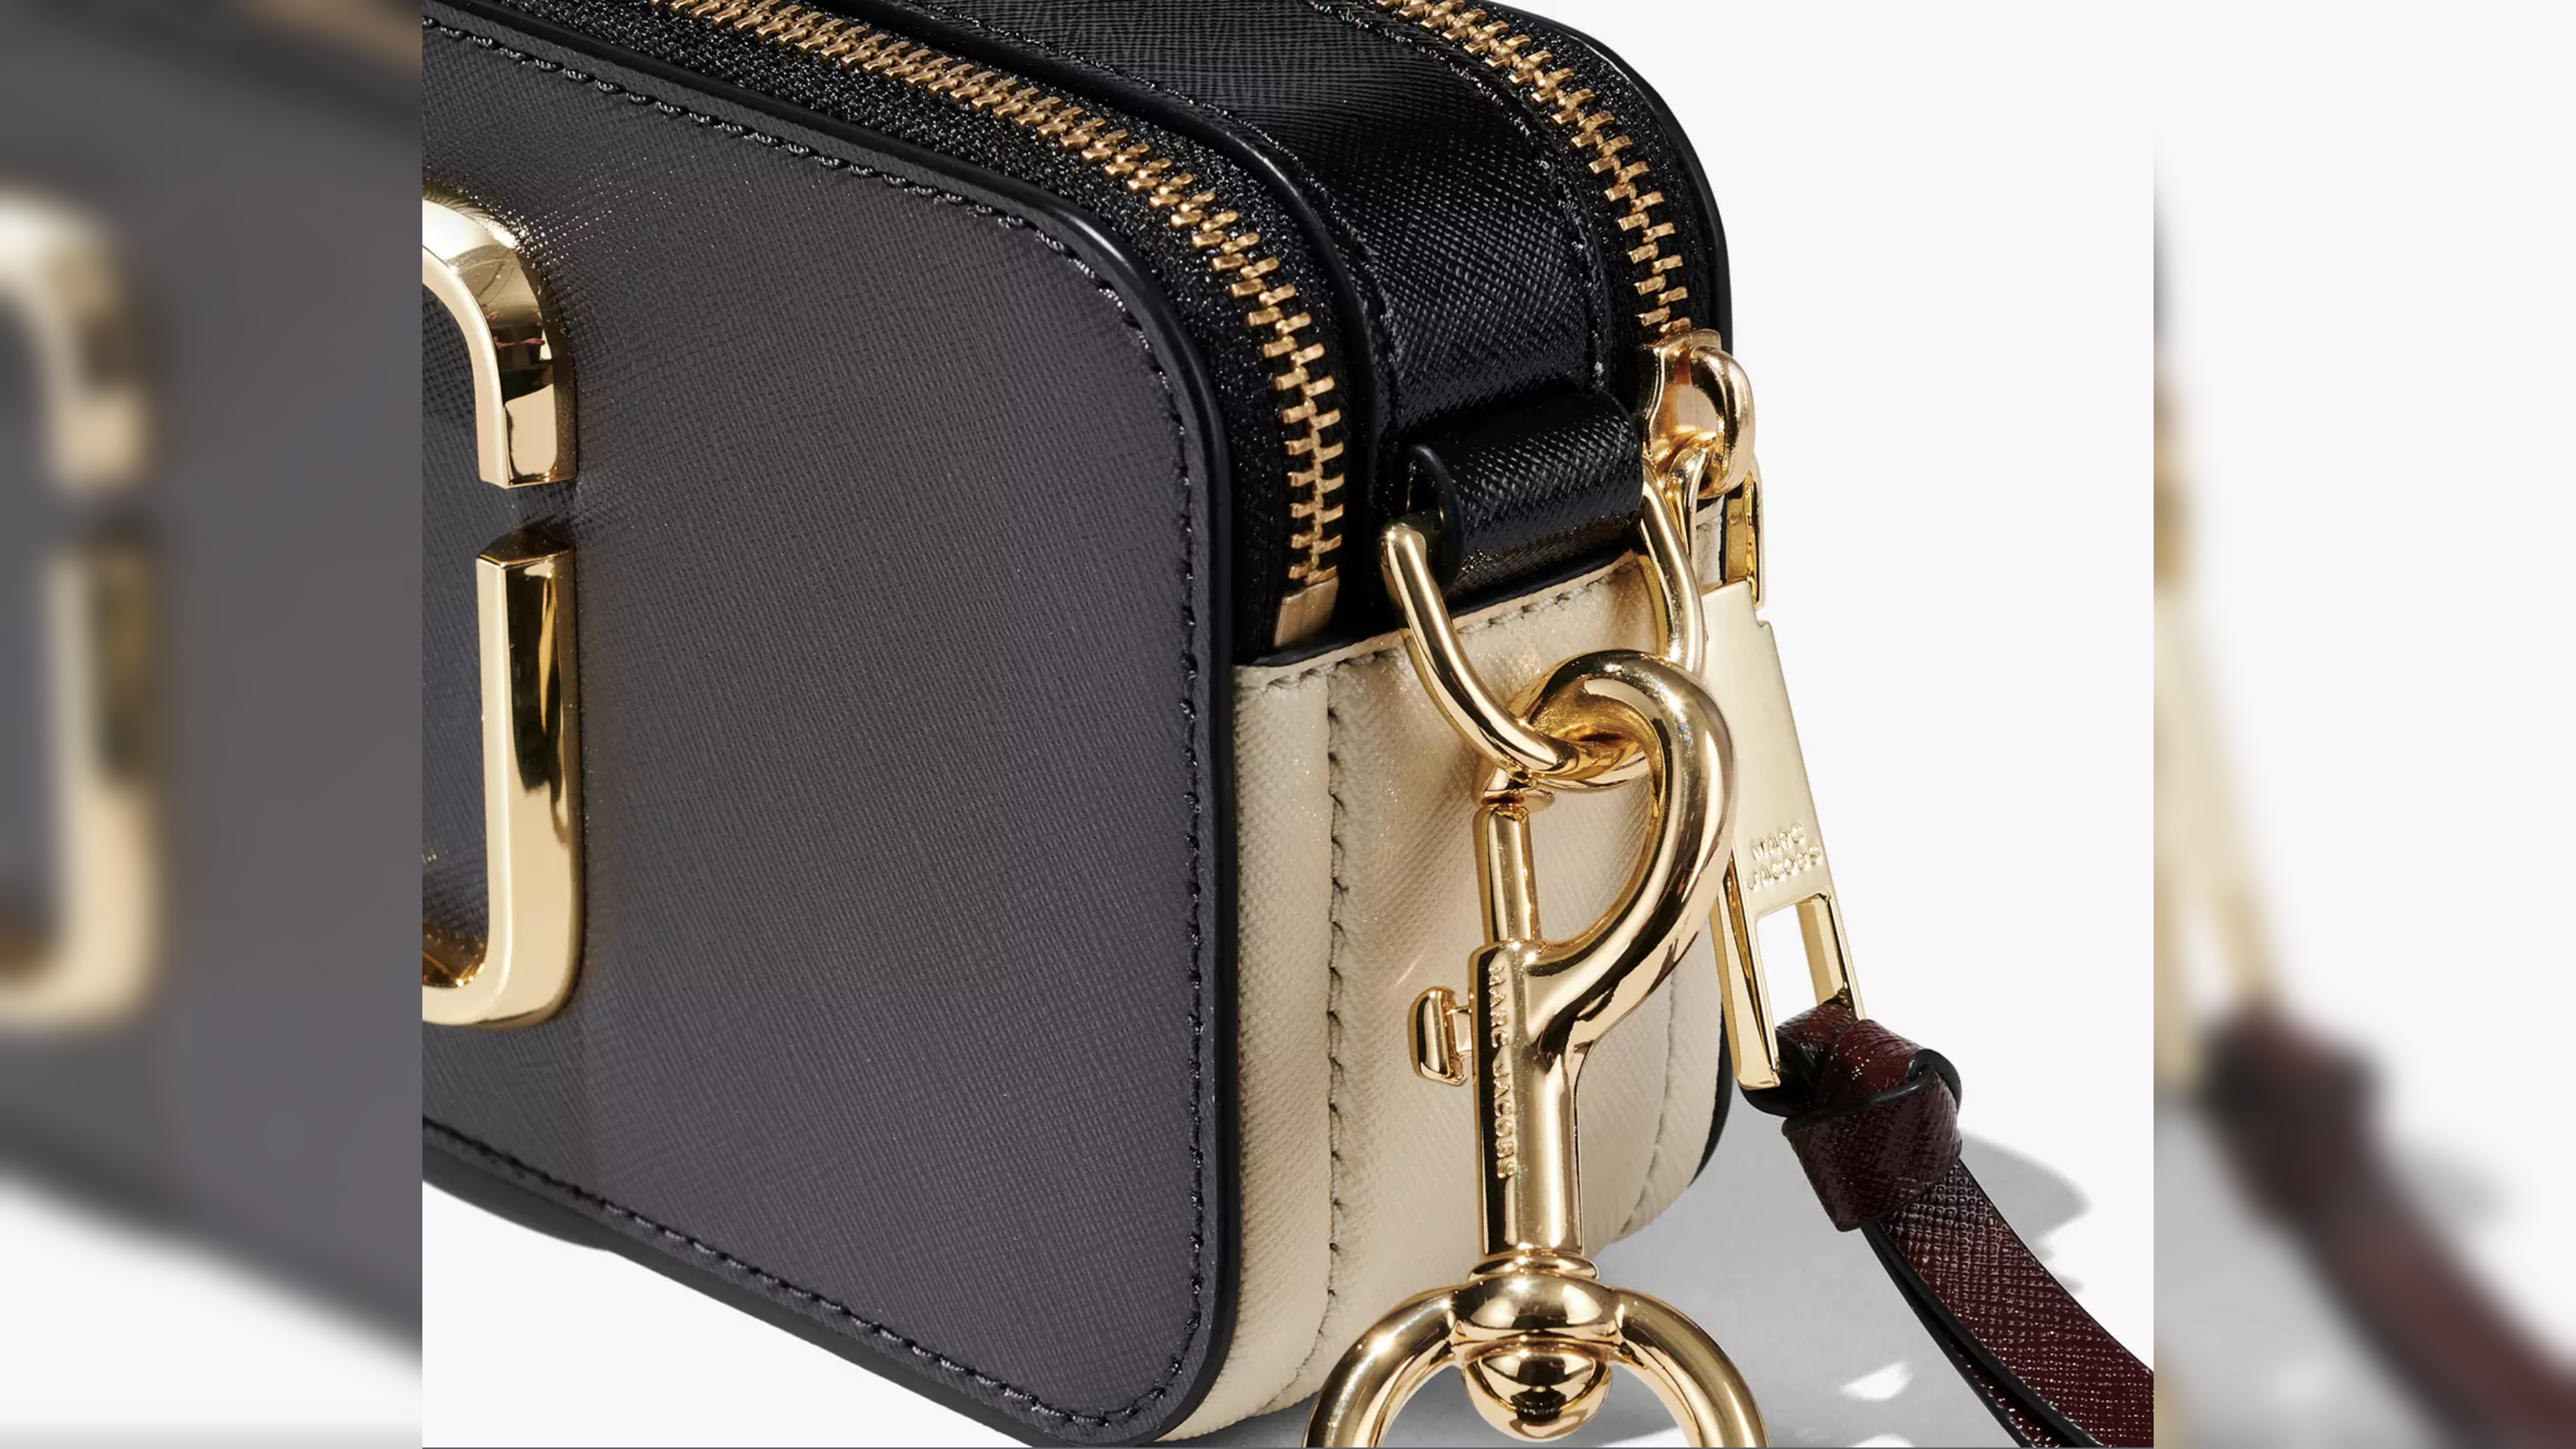 Camera bag by Marc Jacobs